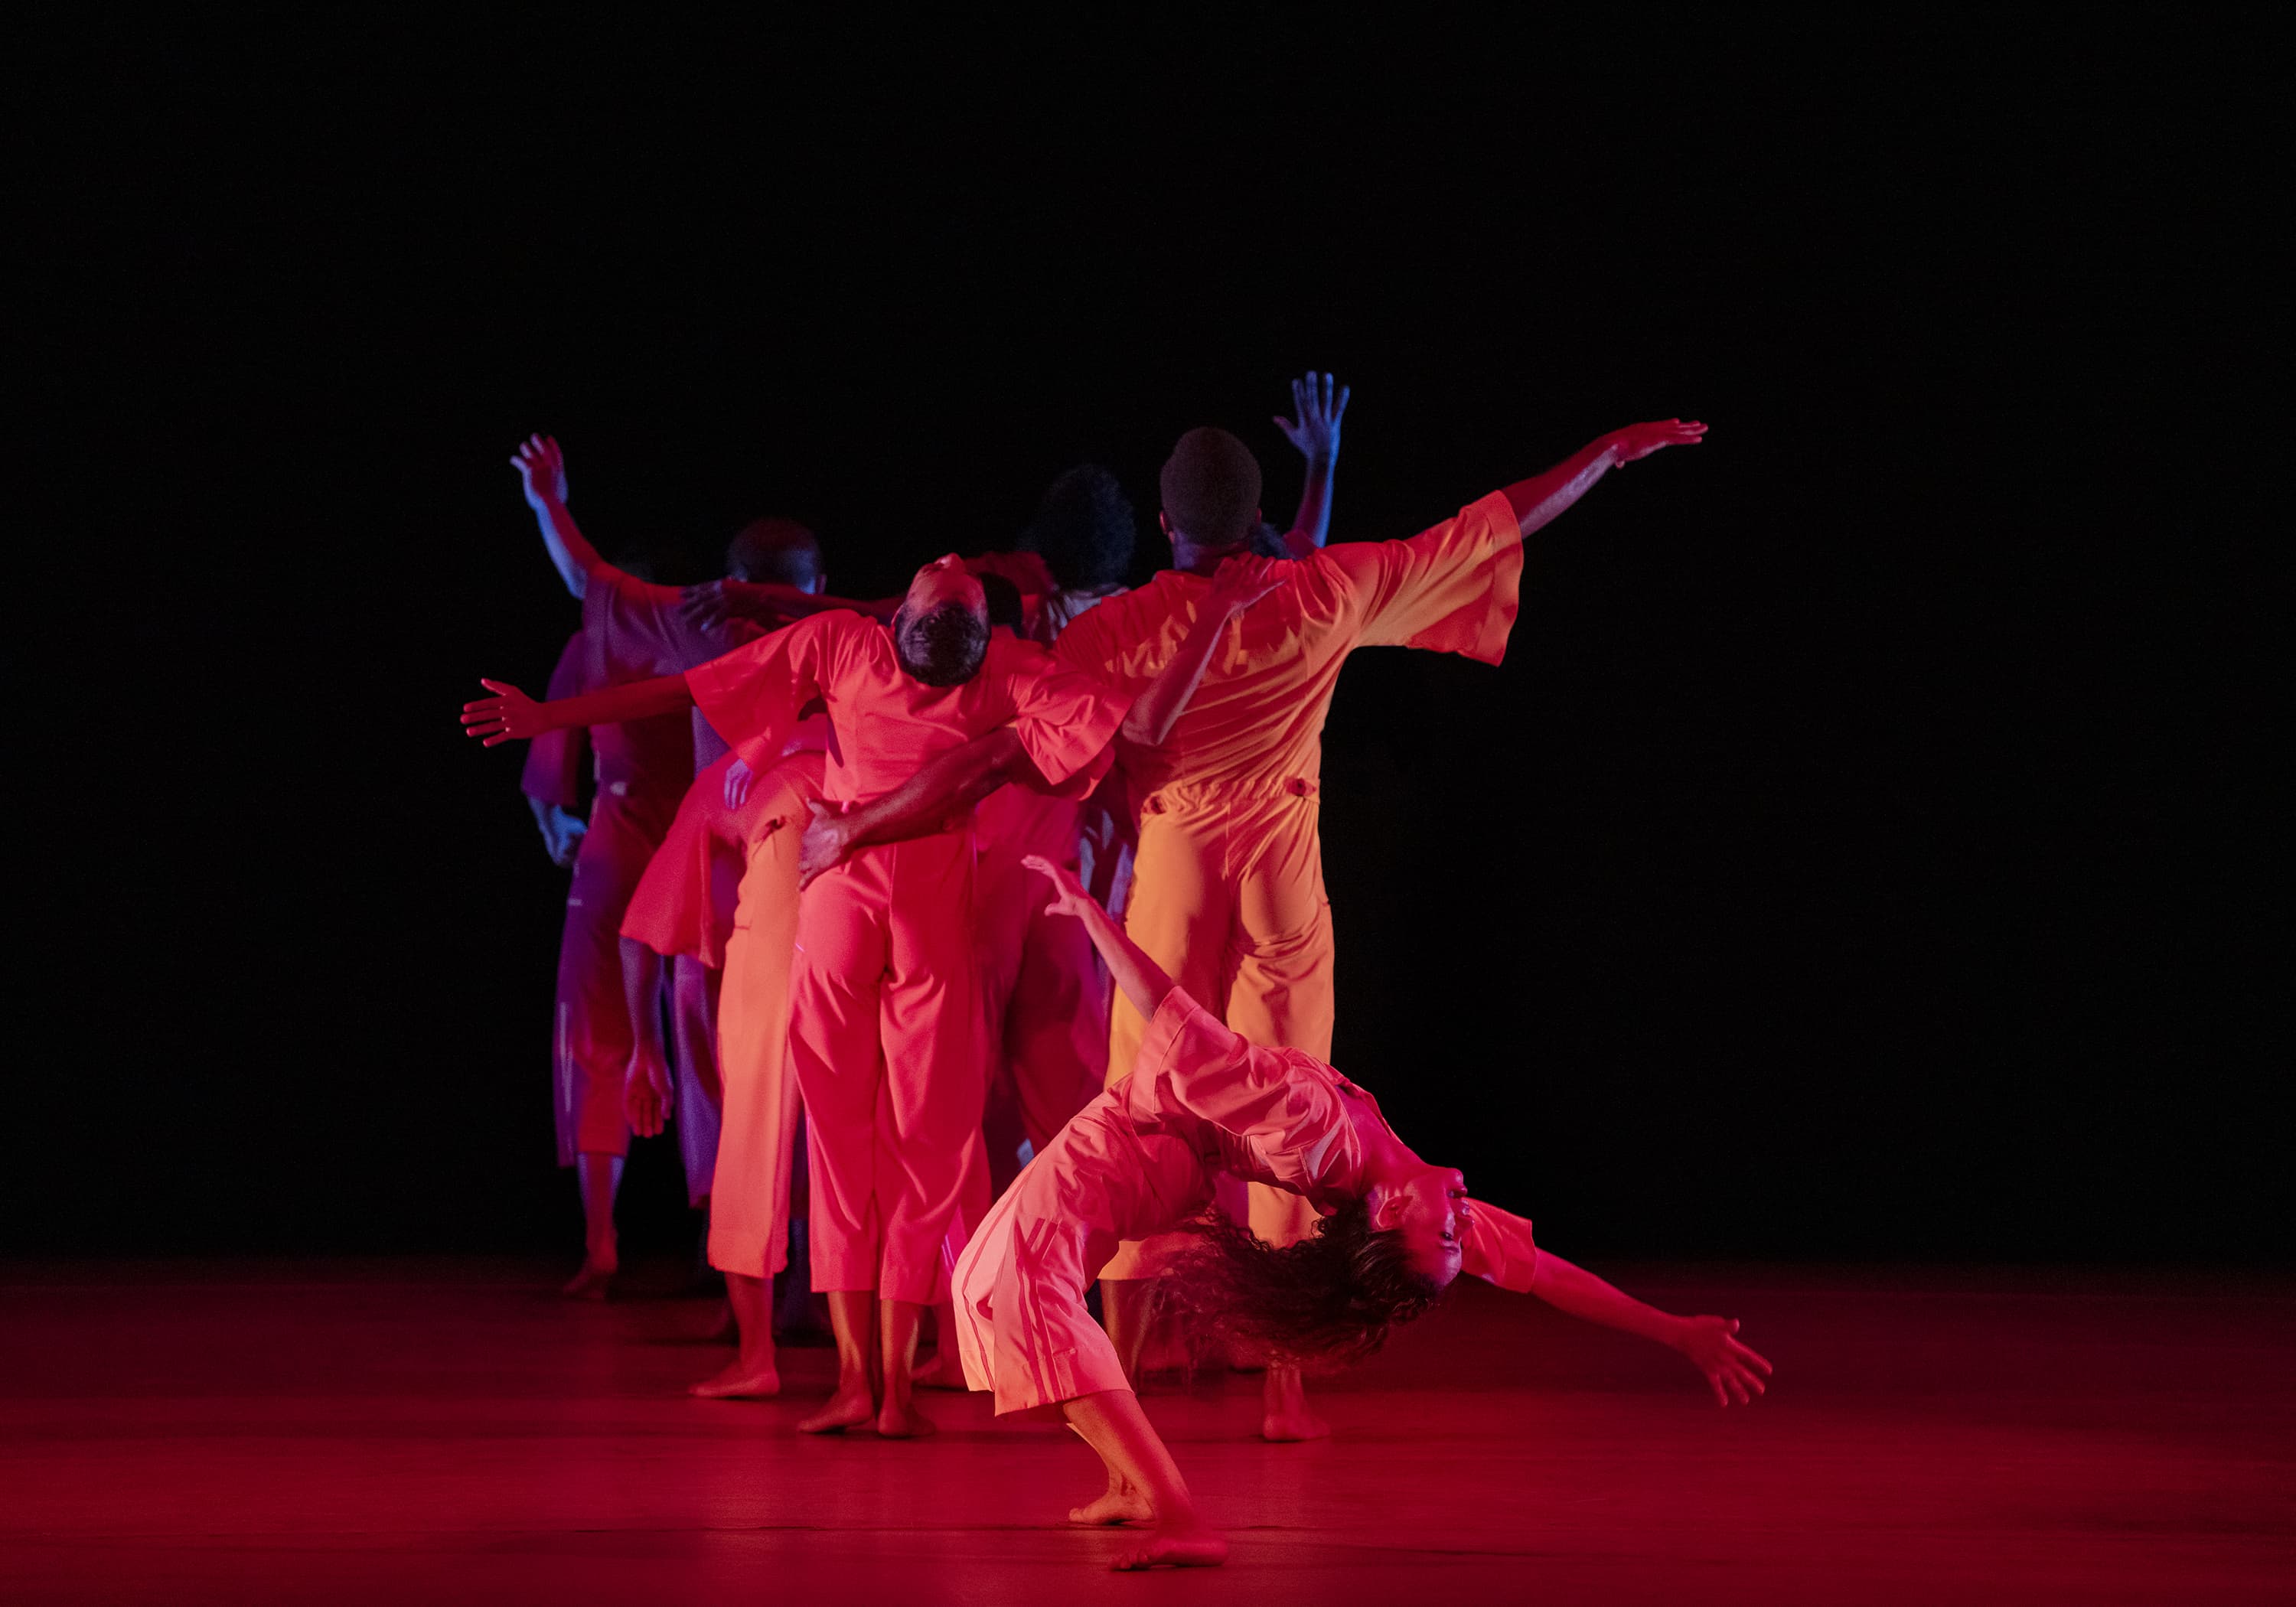 Belén Indhira Pereyra (front) and other members of Alvin Ailey American Dance Theater in Robert Battle's excerpt from Love Stories. (Courtesy Paul Kolnik)